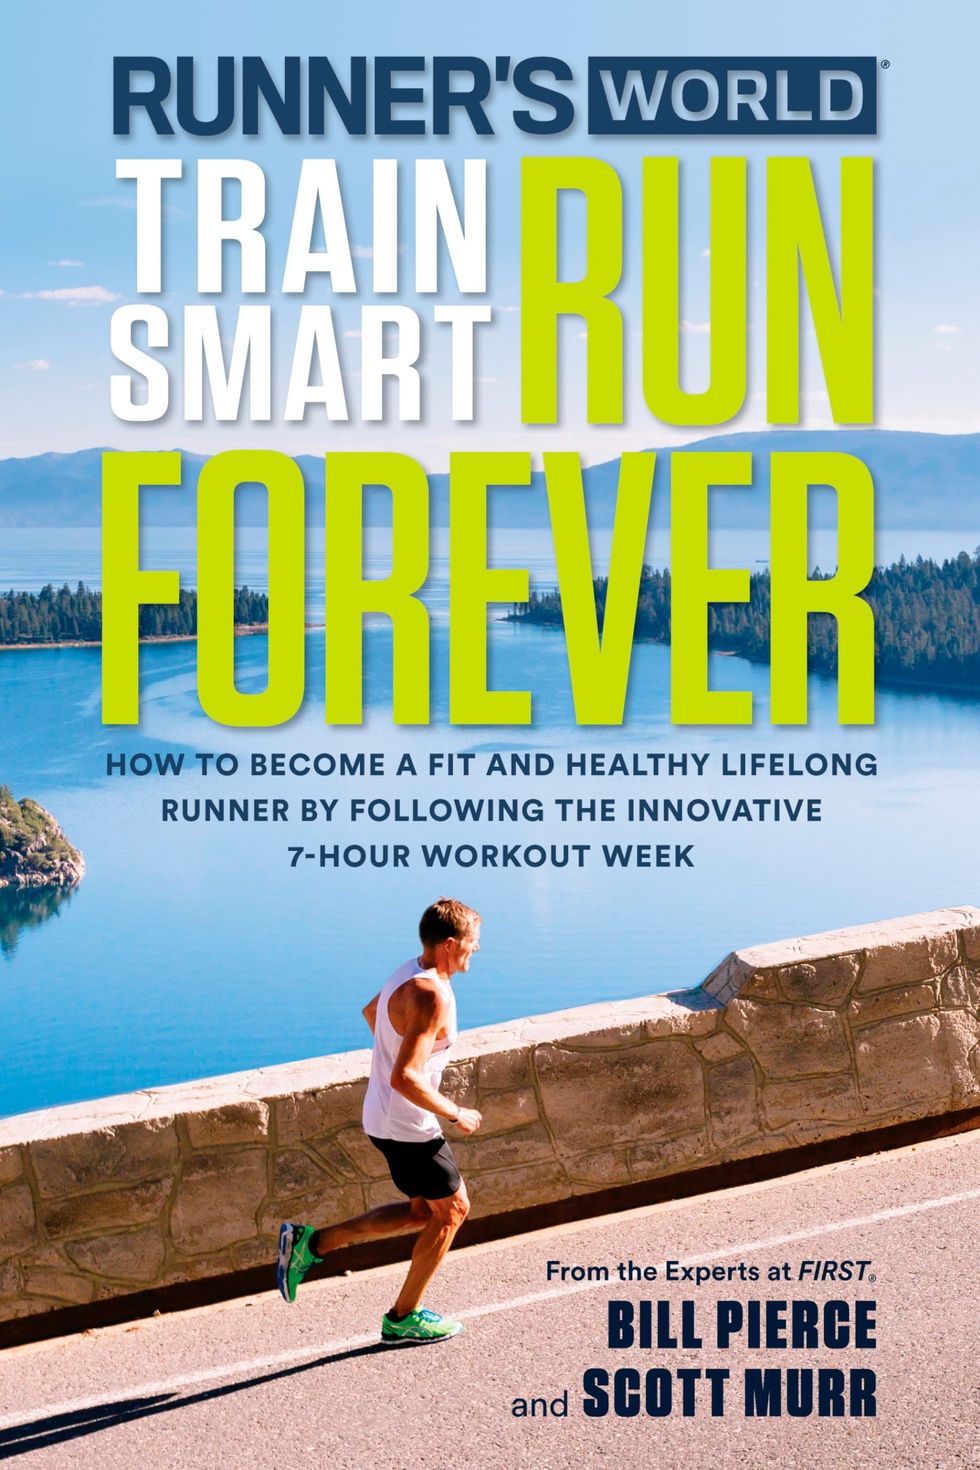 'Runner's World FOOT TYPES & SHOE FIT: How to Become a Fit and Healthy Lifelong Runner by Following The Innovative 7-Hour Workout Week' by Bill Pierce and Scott Murr